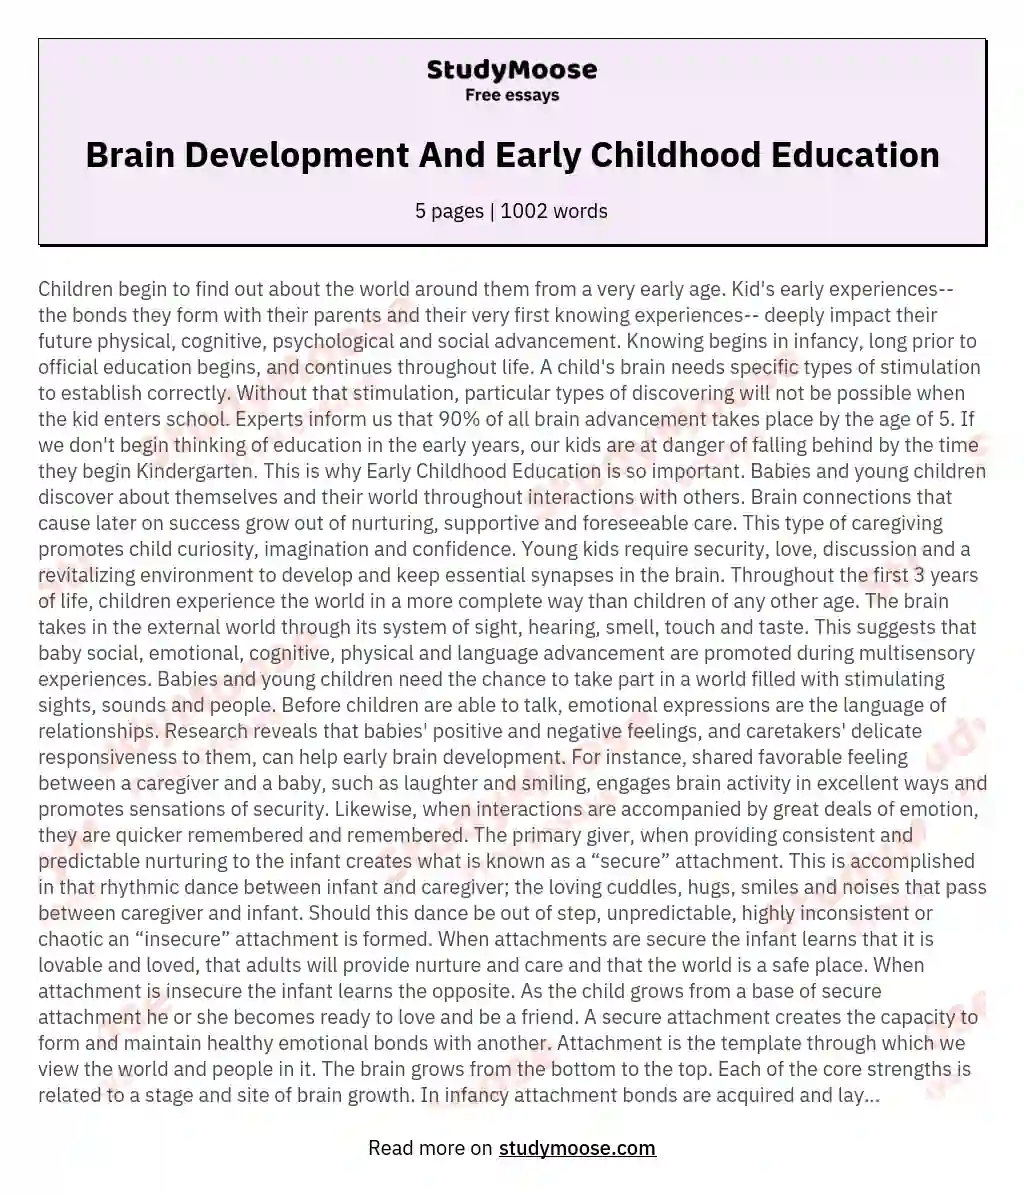 Brain Development And Early Childhood Education essay